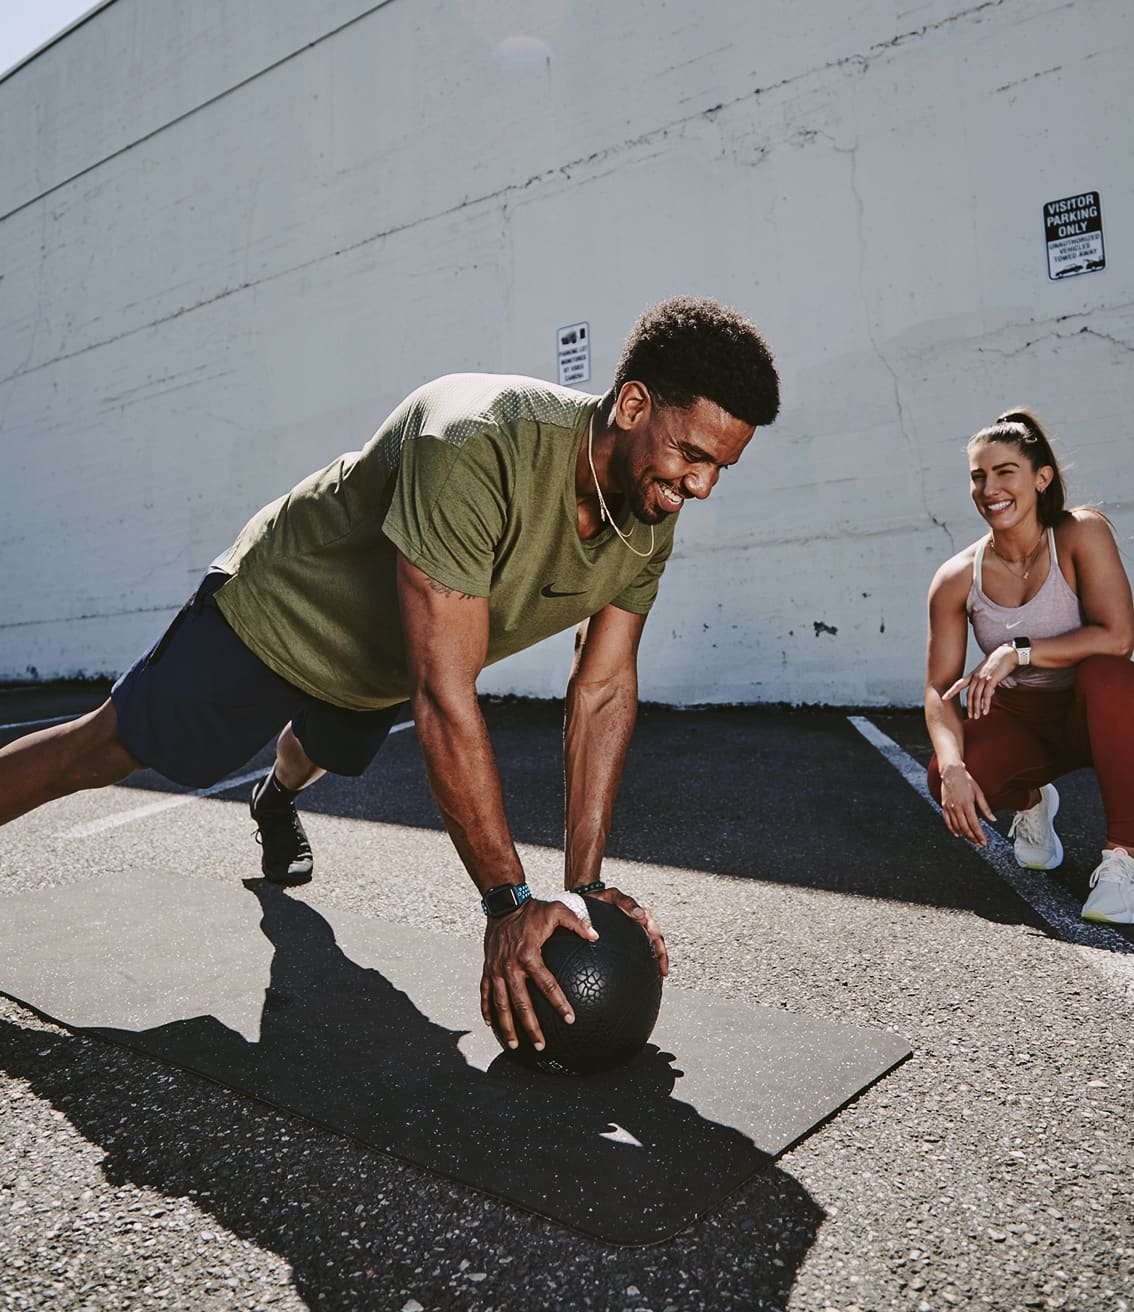 Training Club Workouts & More. Nike CA